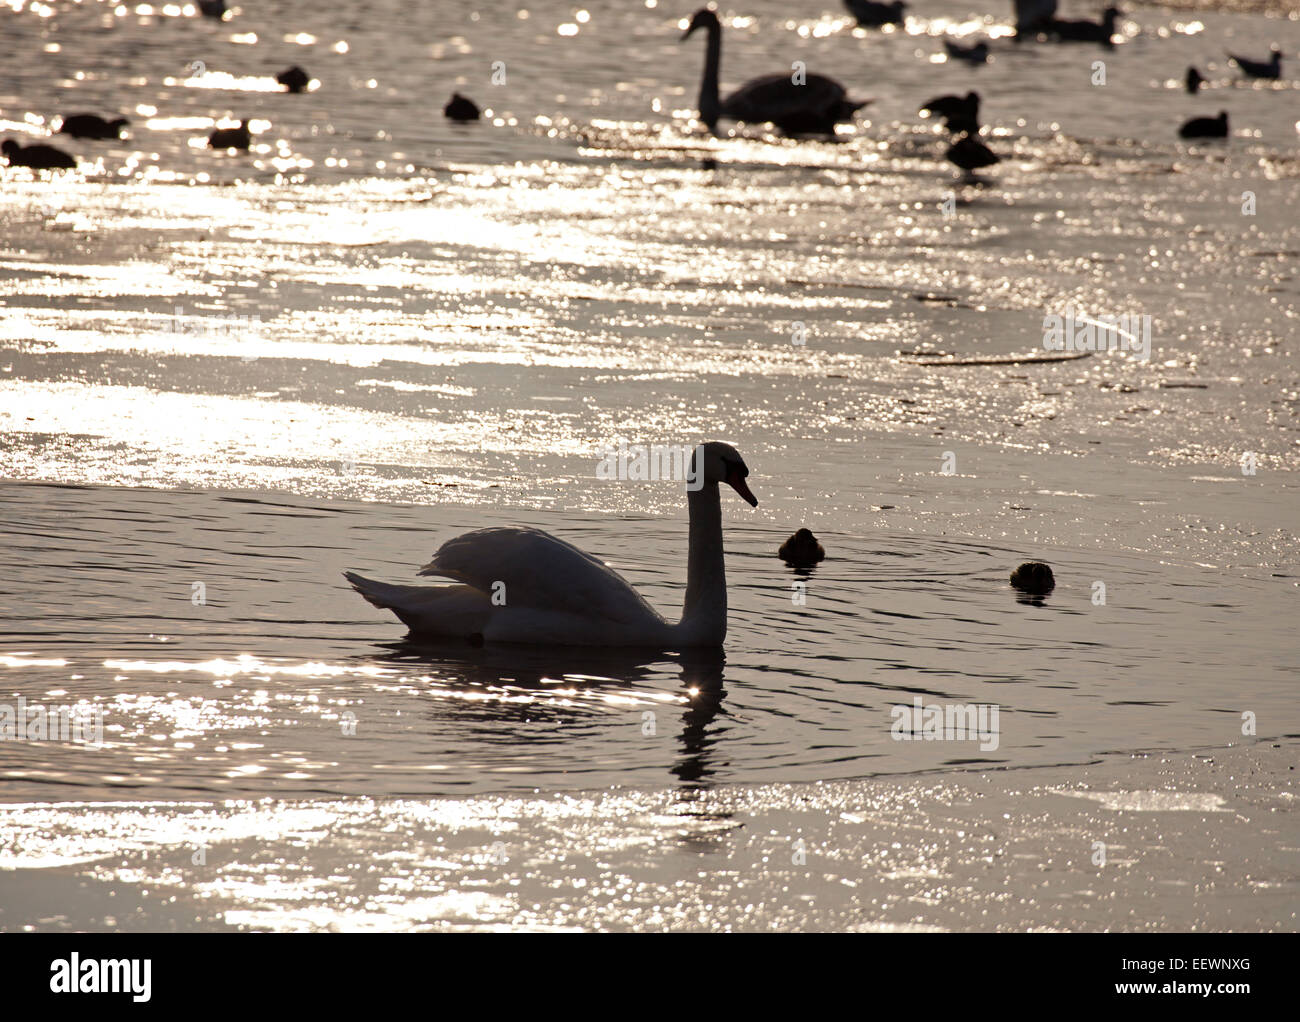 Edinburgh, Scotland, UK. 22nd Jan, 2015. UK Weather: Duddingston Loch frozen at zero degrees with only a small area of water visible making it difficult for the Swans and ducks to feed, Stock Photo